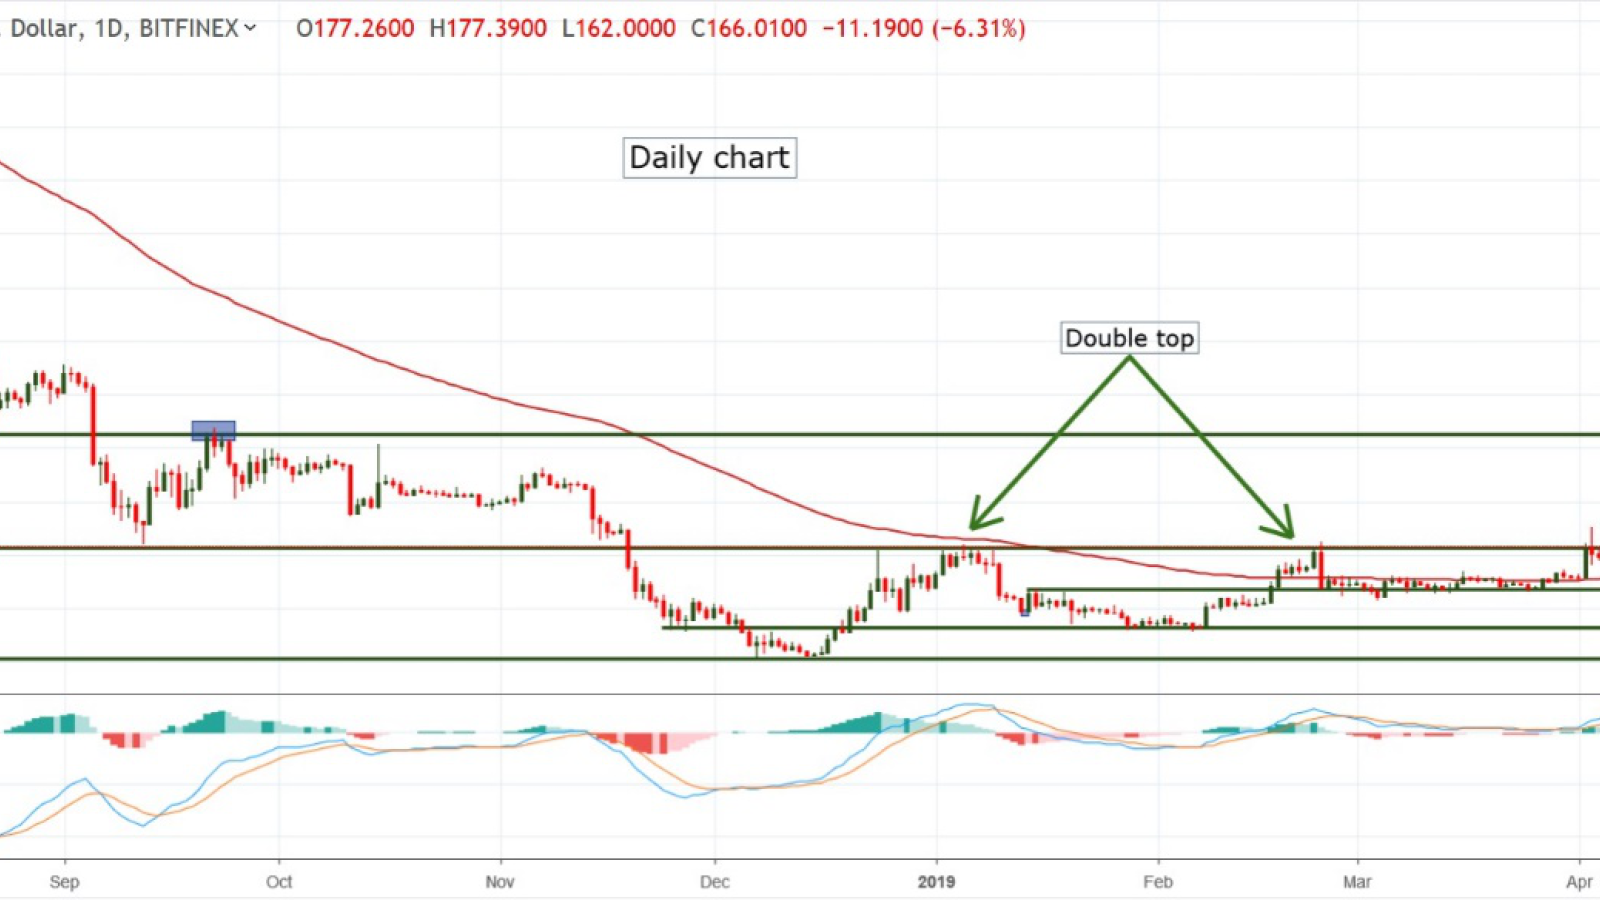 Ethereum 6 Month Price Prediction – ETH Price May Touch $ Very Soon. ETH/USD Price Forecast 